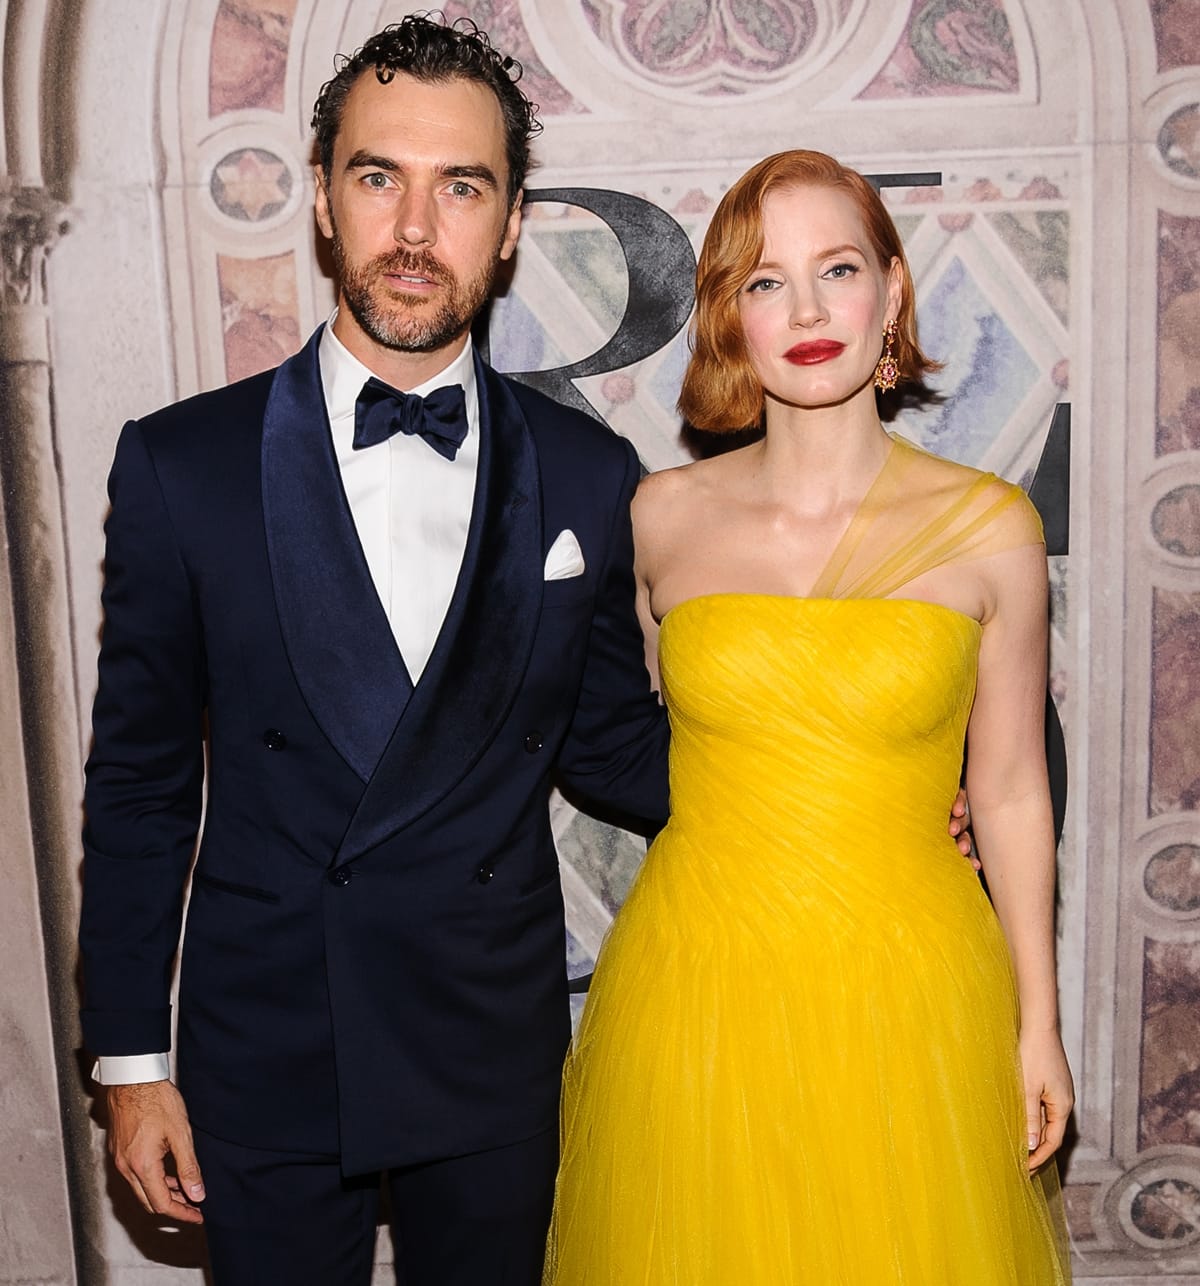 Gian Luca Passi de Preposulo and Jessica Chastain met at a fashion show on the same day she was nominated for a Best Supporting Actress Oscar for her role in The Help